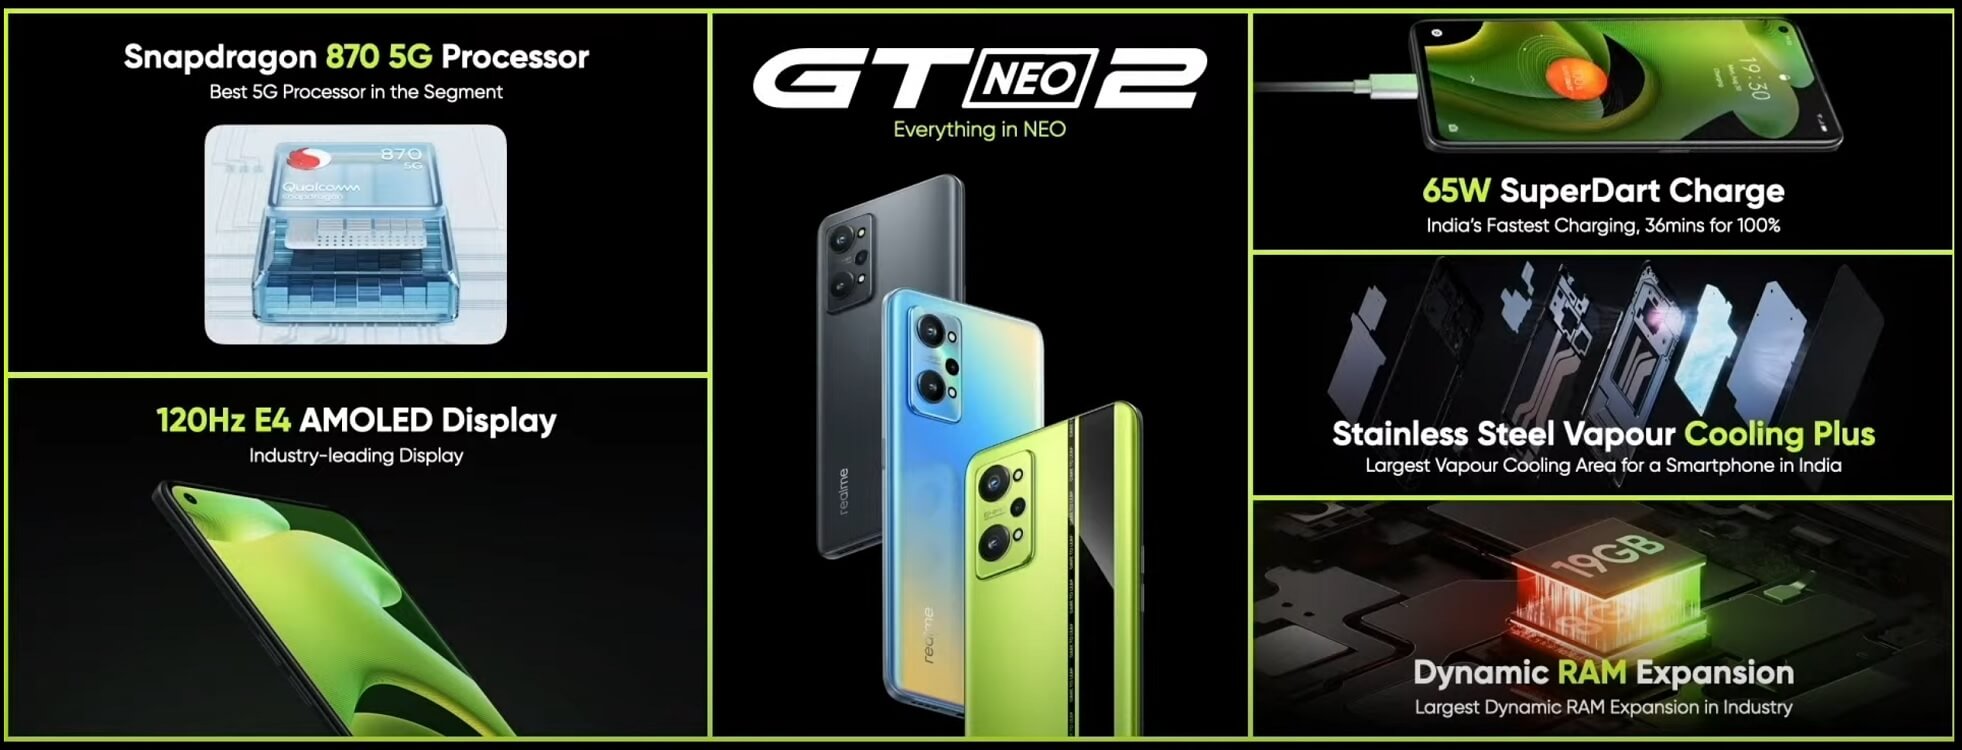 Realme GT Neo2 features